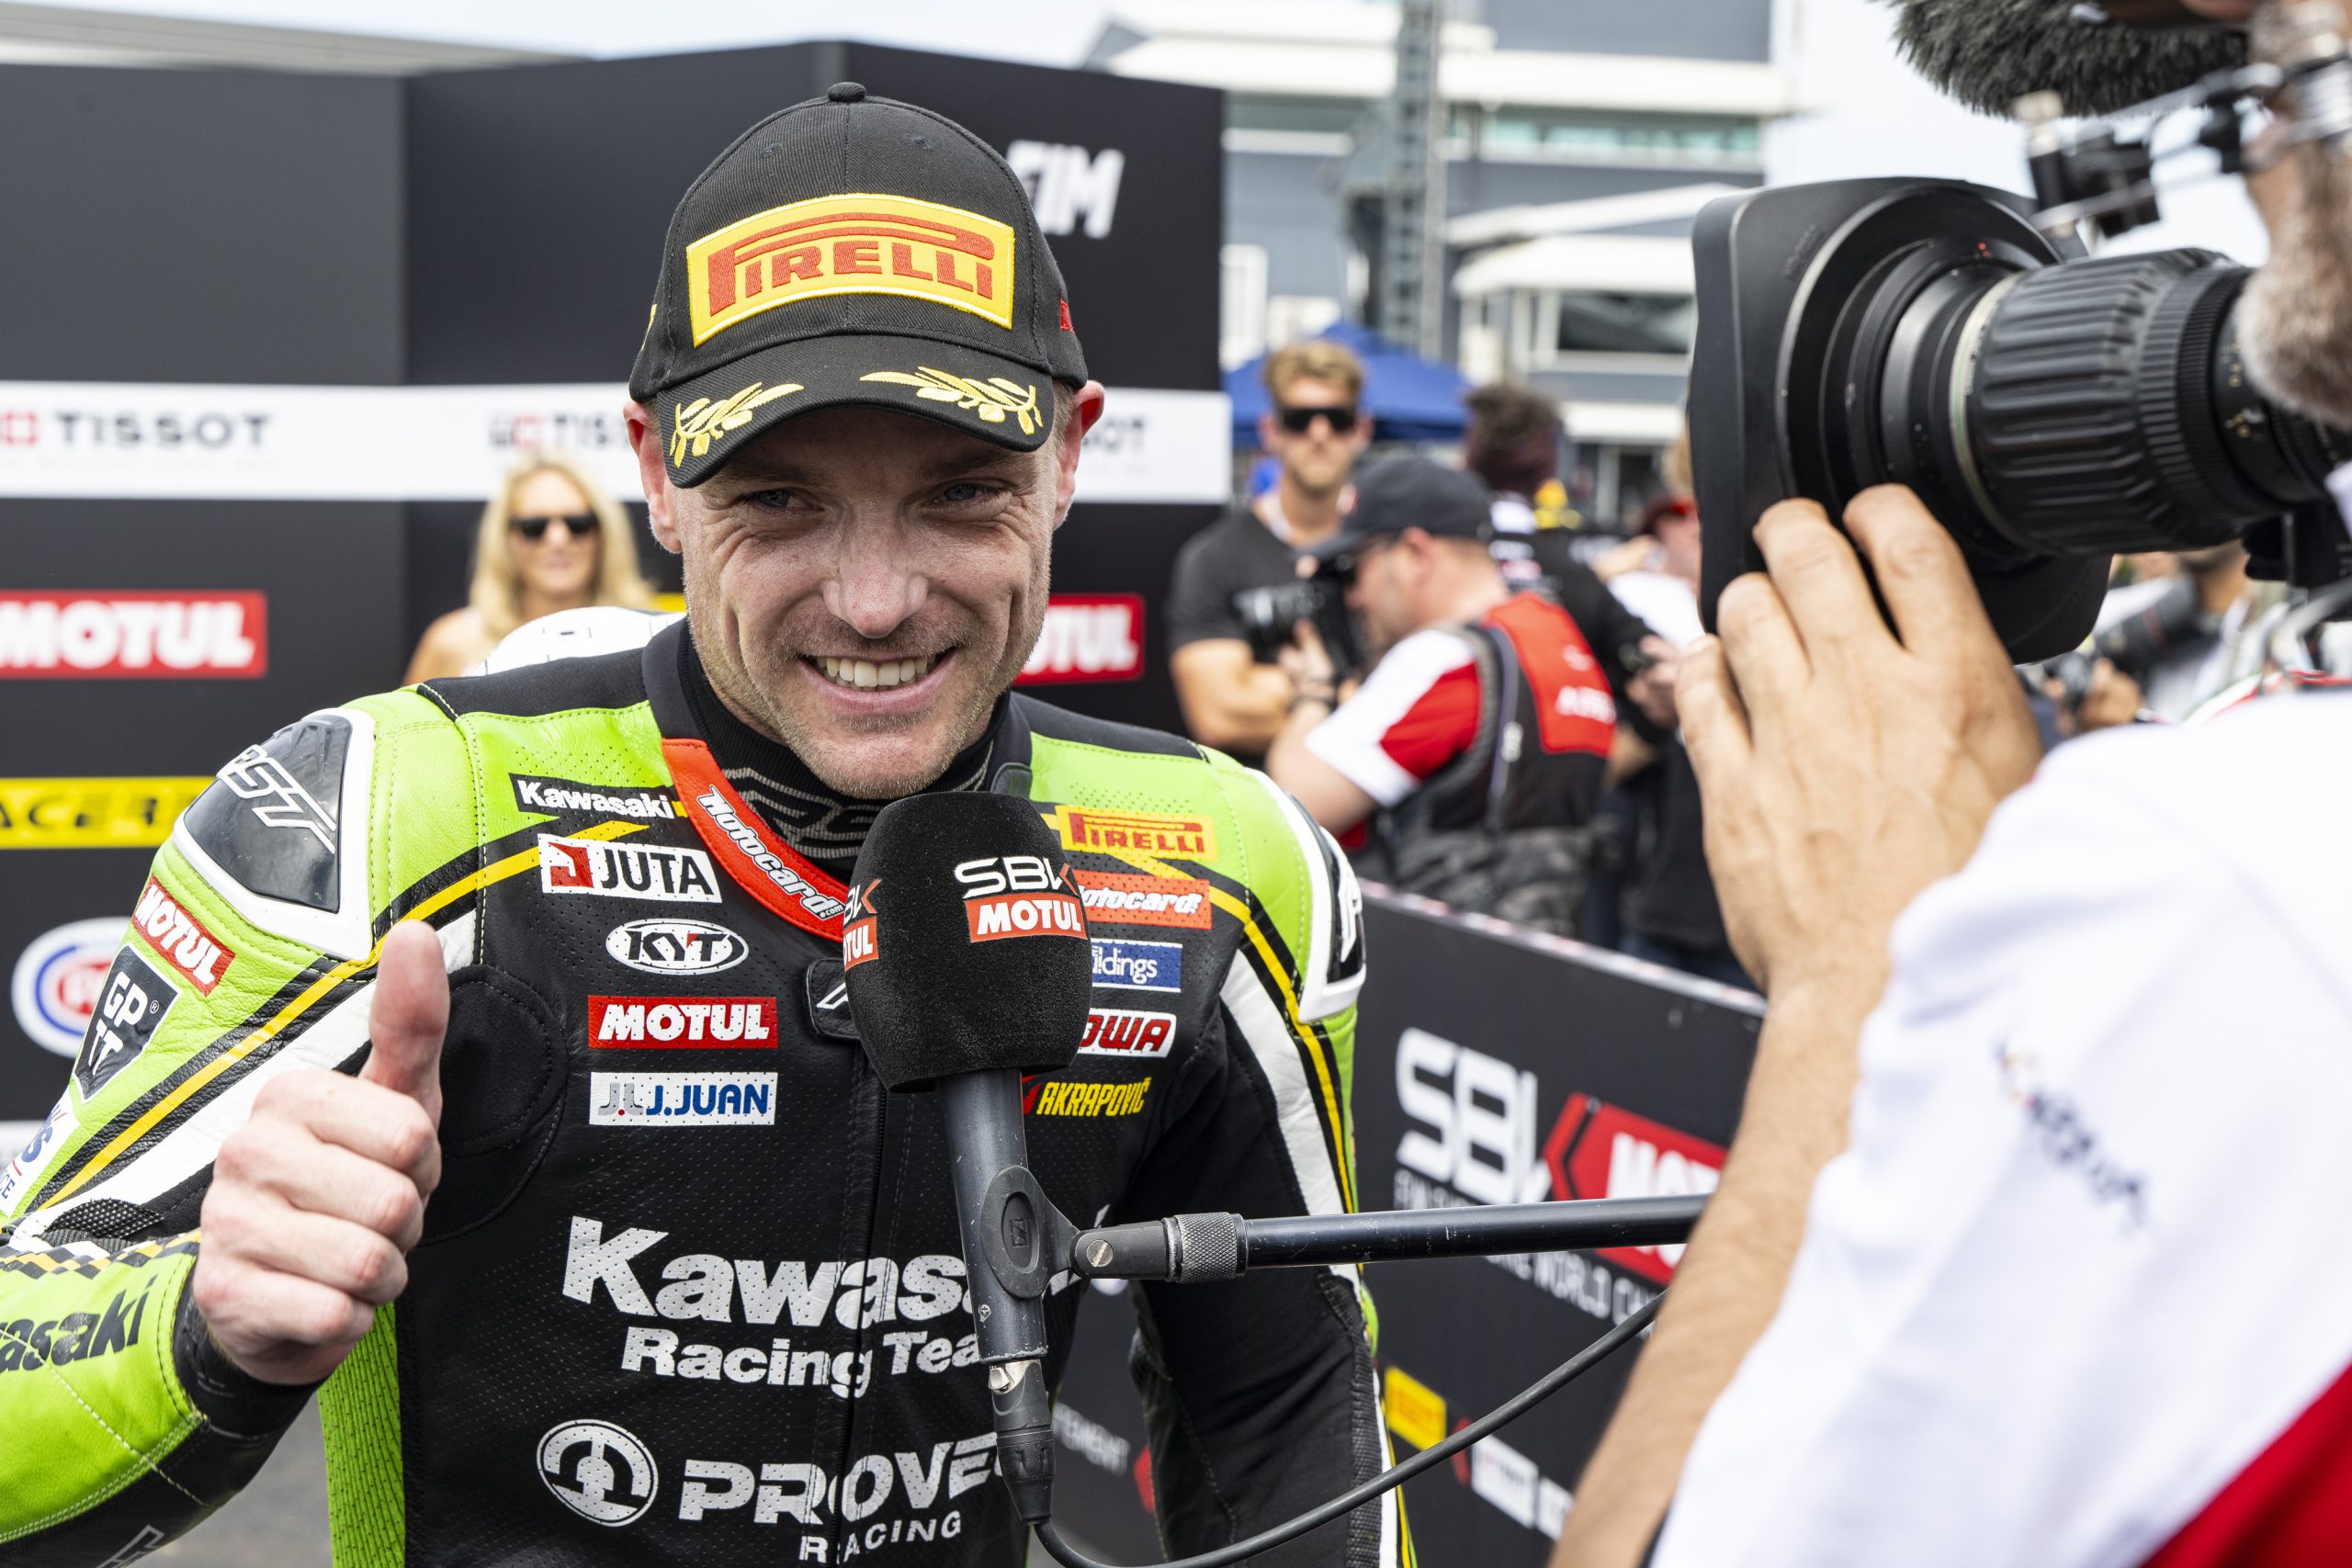 Featured image for “WorldSBK: Alex Lowes reflects on an ‘unbelievable day’”